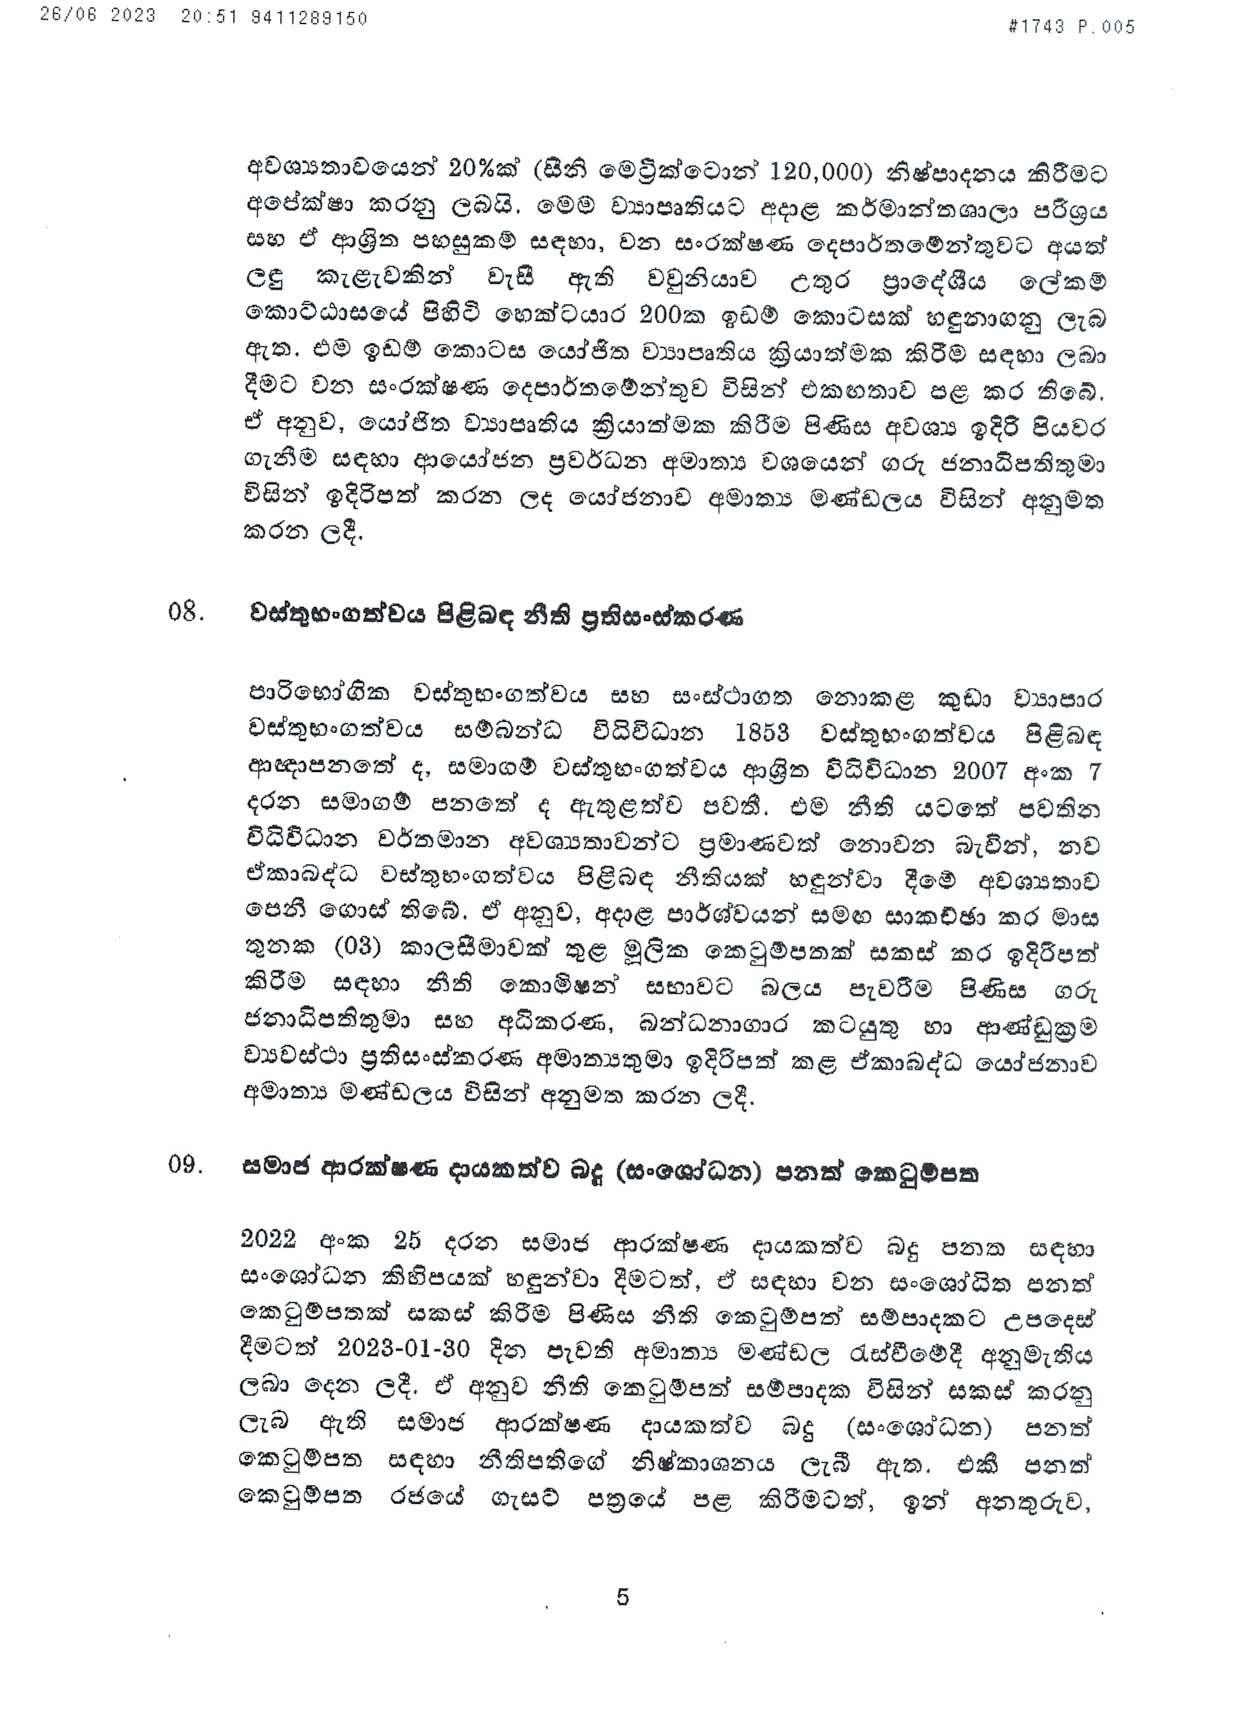 Cabinet Decision on 26.06.2023 page 005